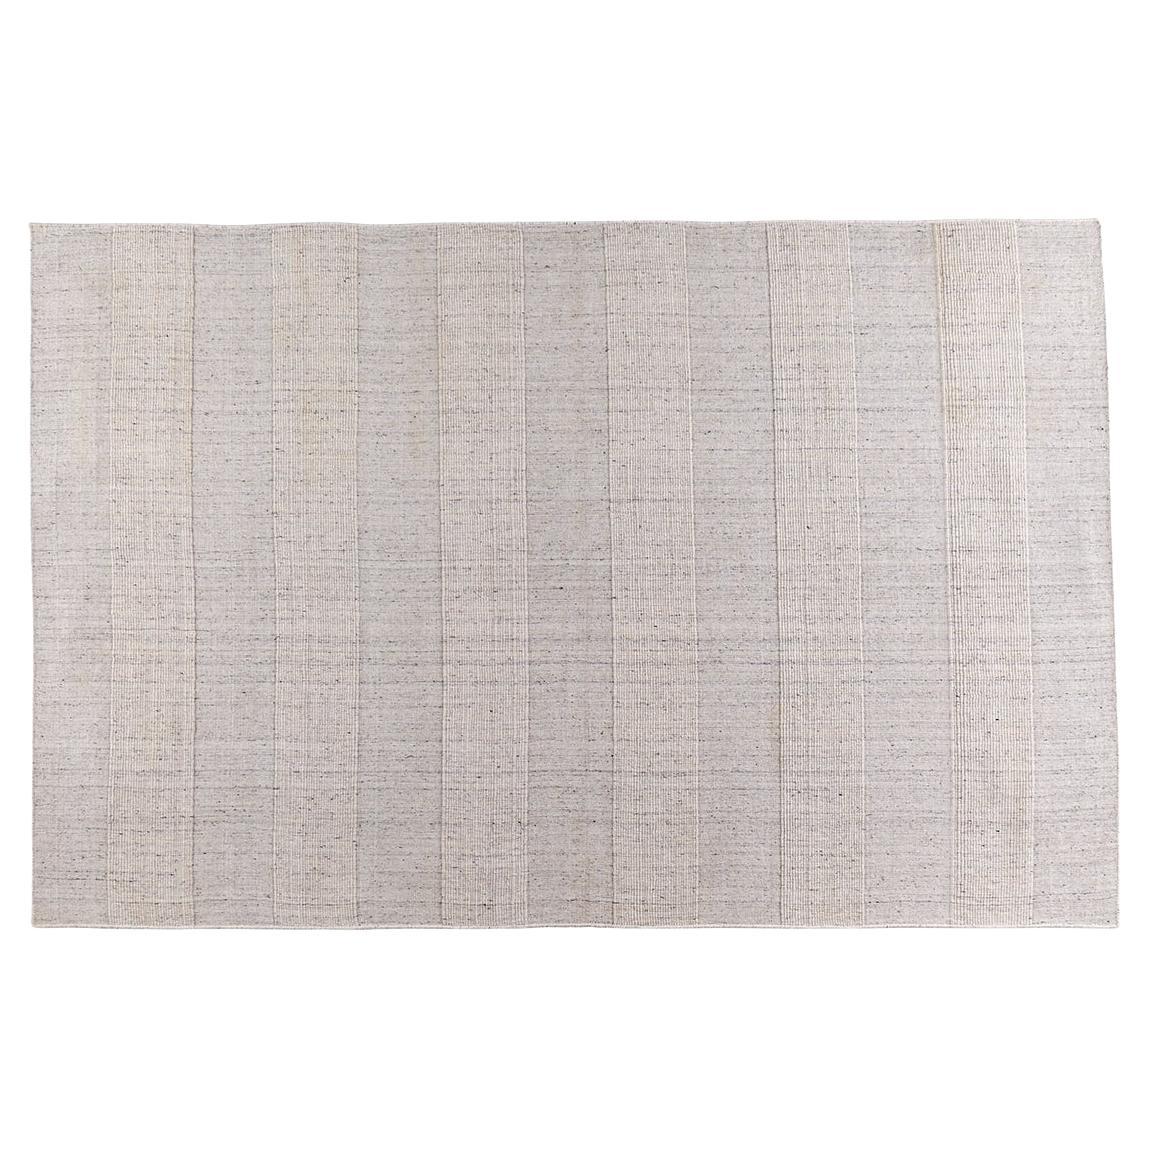 'Mithun' Rug hand-woven in sustainable, eco-friendly Wool mix, 170 x 240 cm For Sale